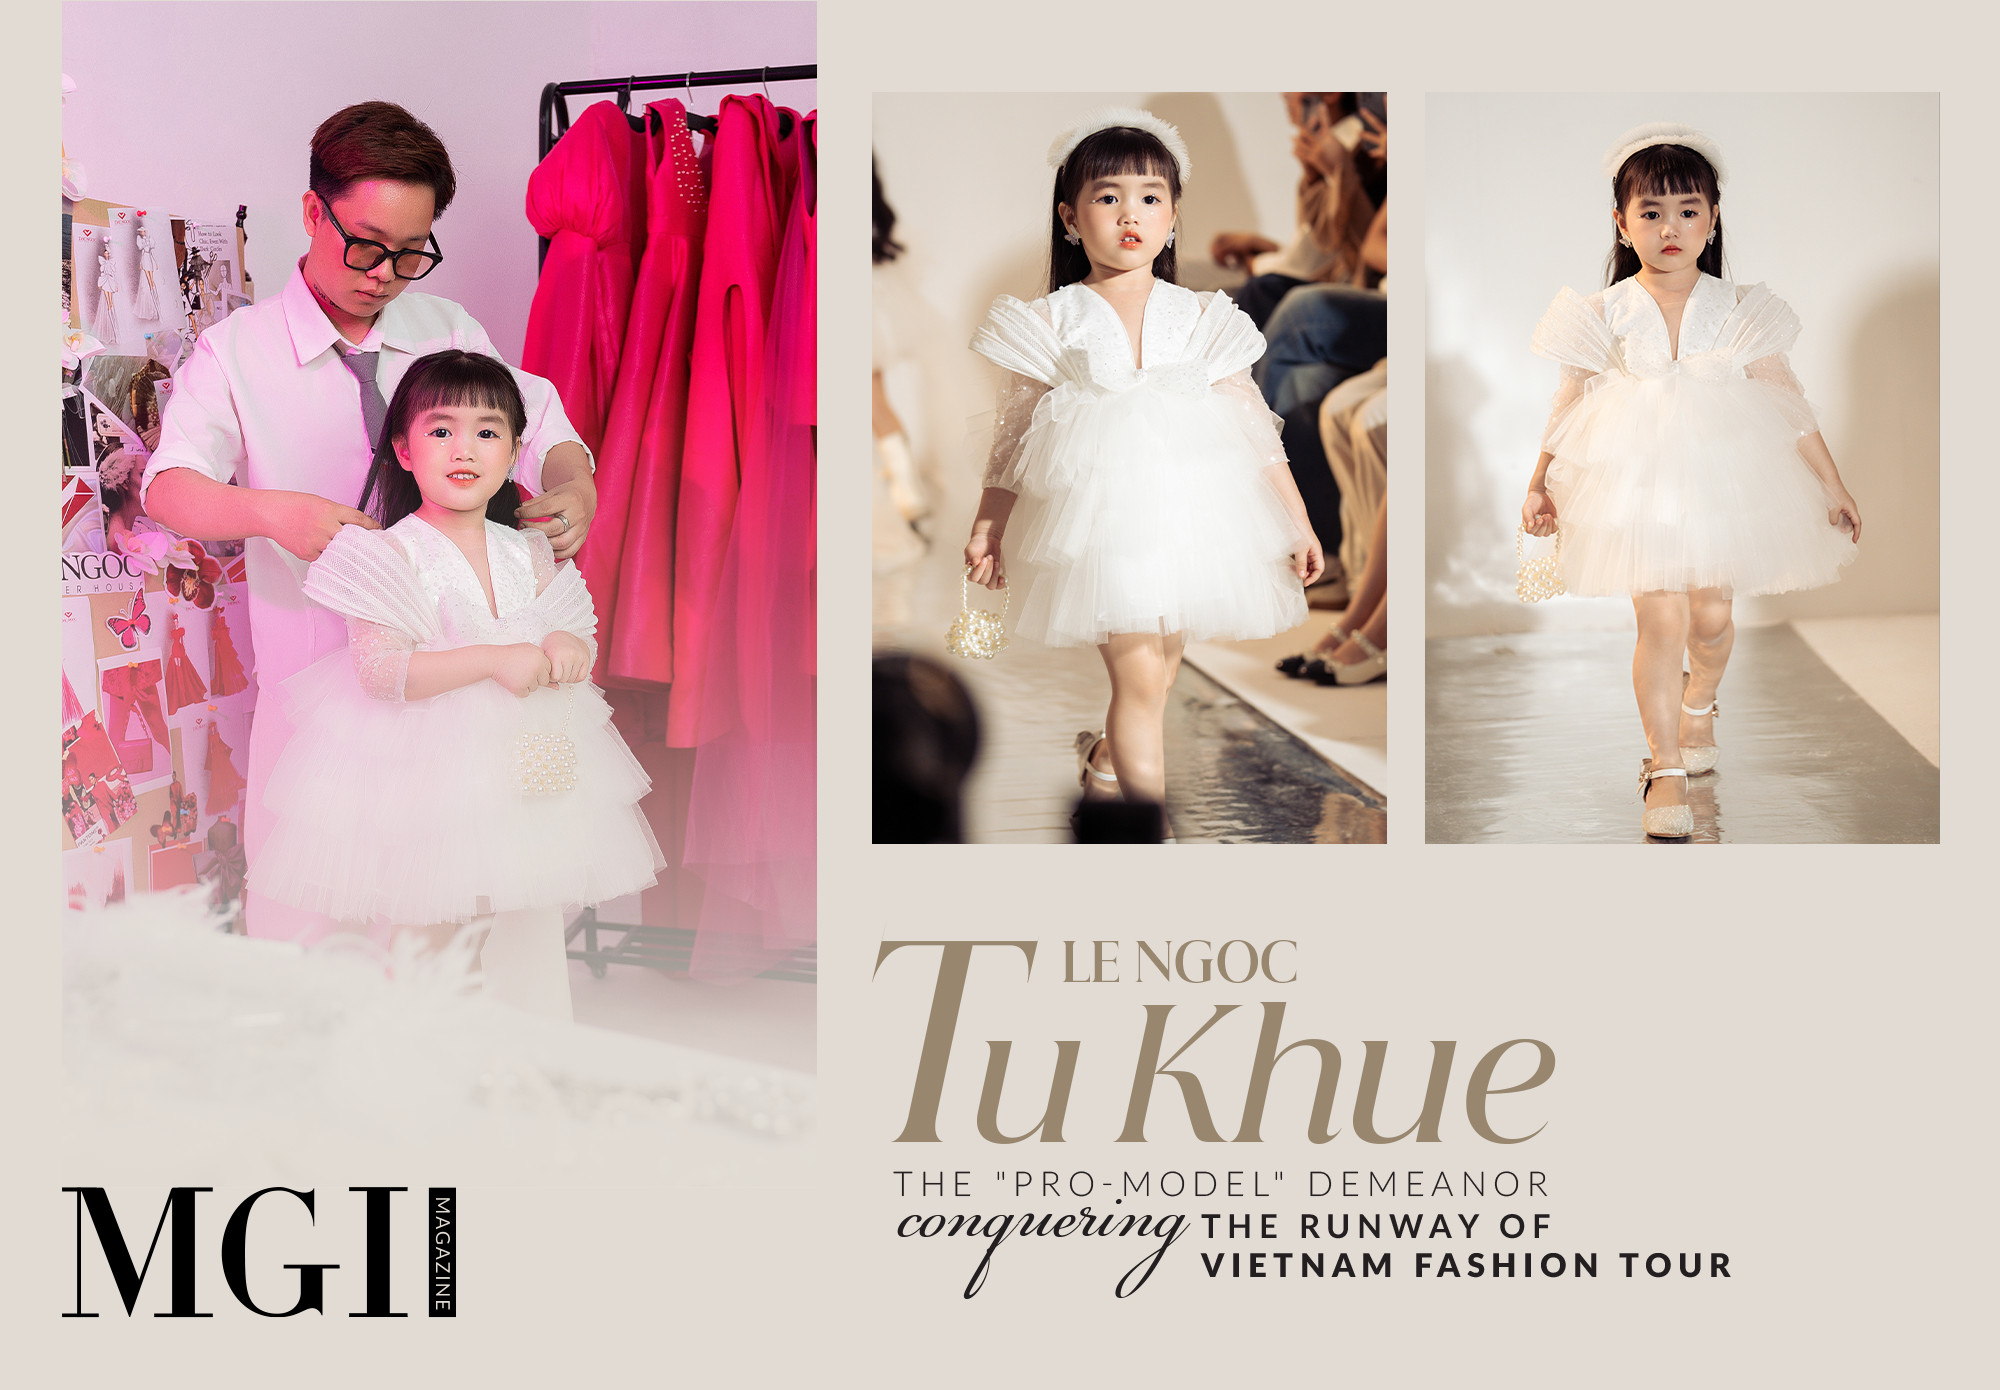 Model kid Le Ngoc Tu Khue conquering the stage of Vietnam Fashion Tour